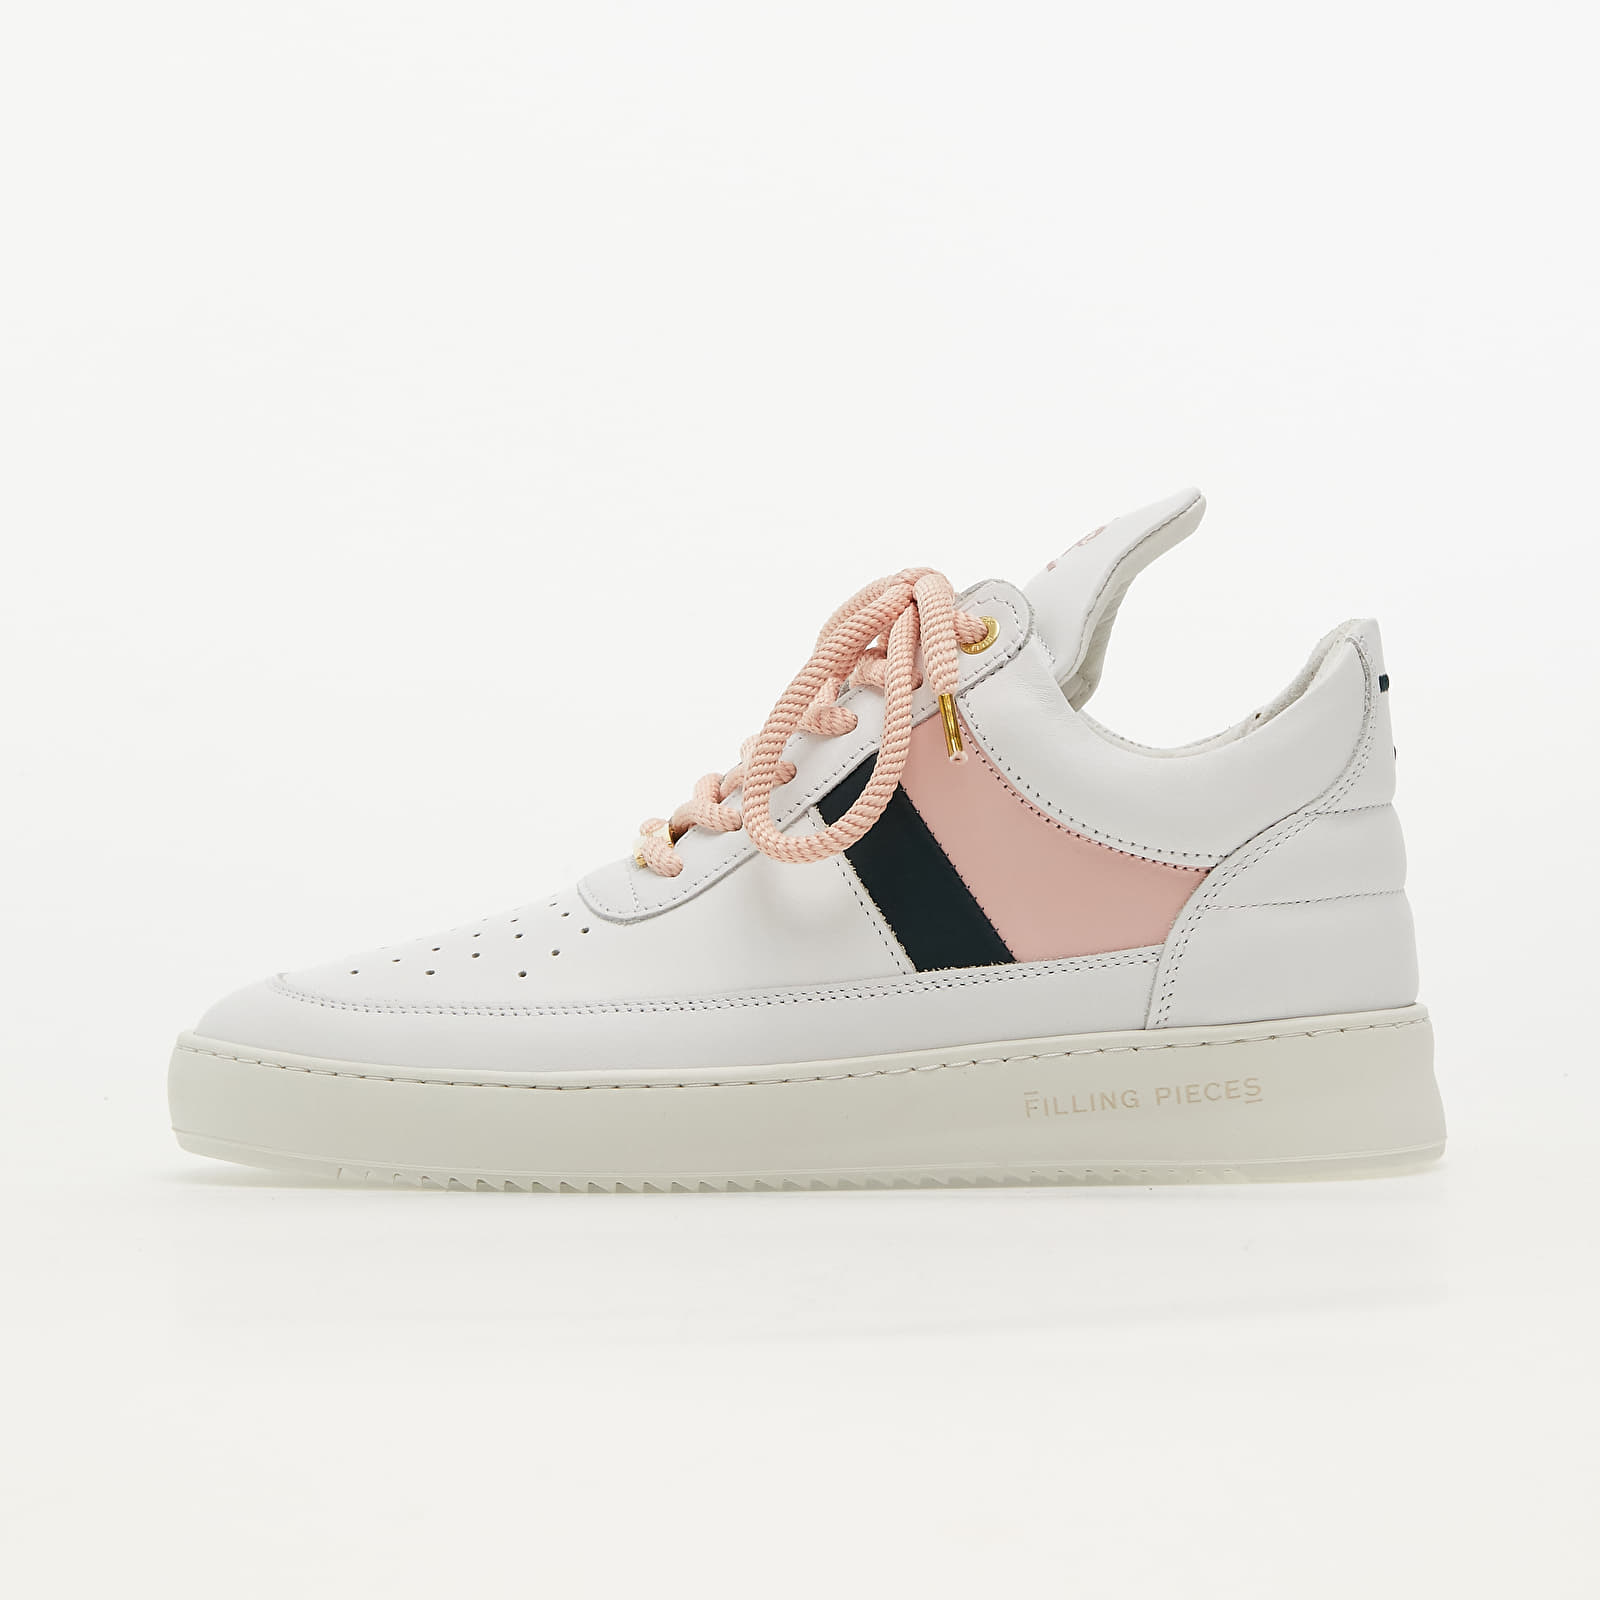 Men's shoes Filling Pieces Low Top Game Pink